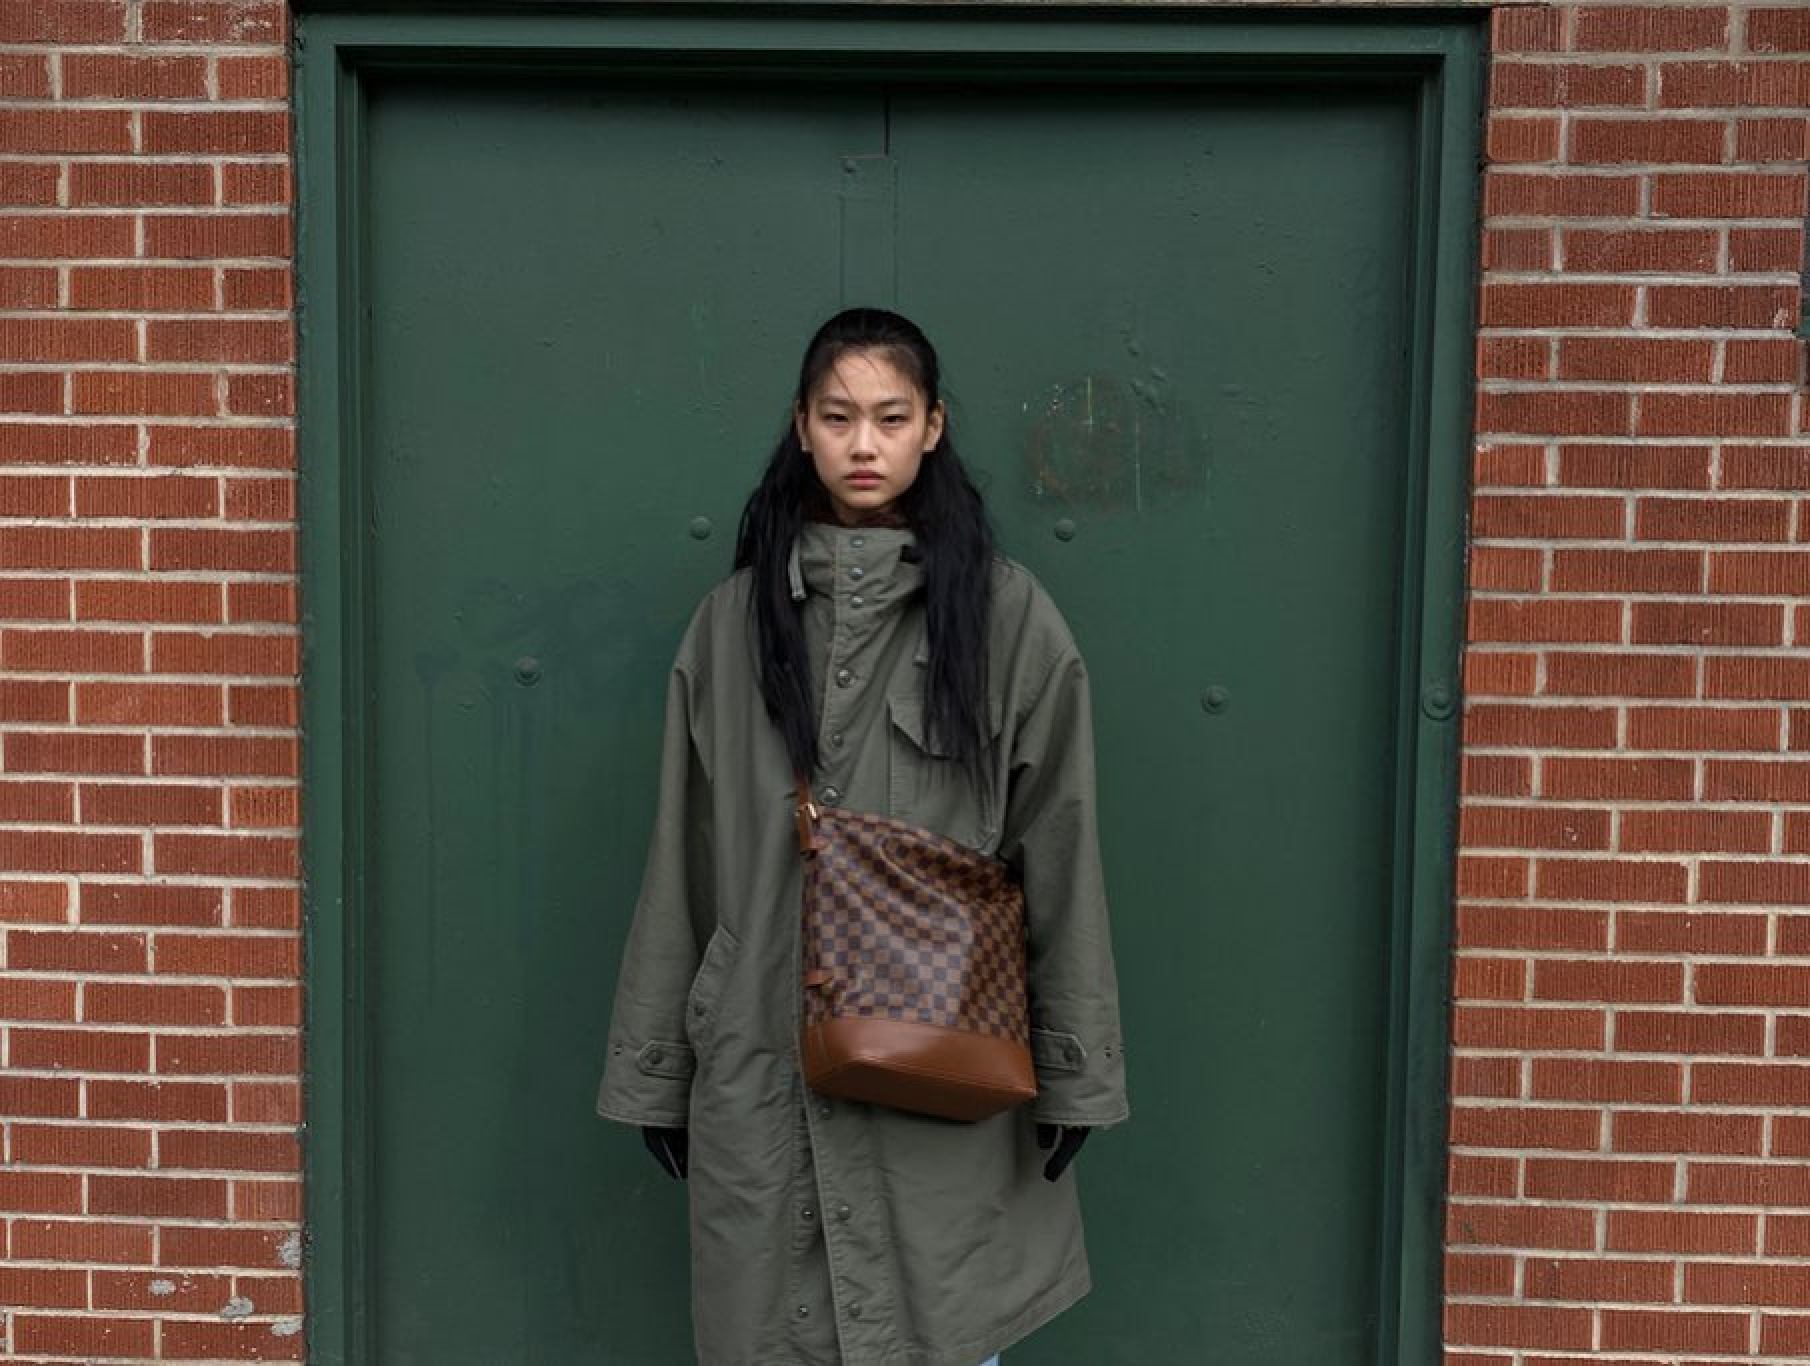 Deconstructing Jung Ho-yeon's street style: the Squid Game actress